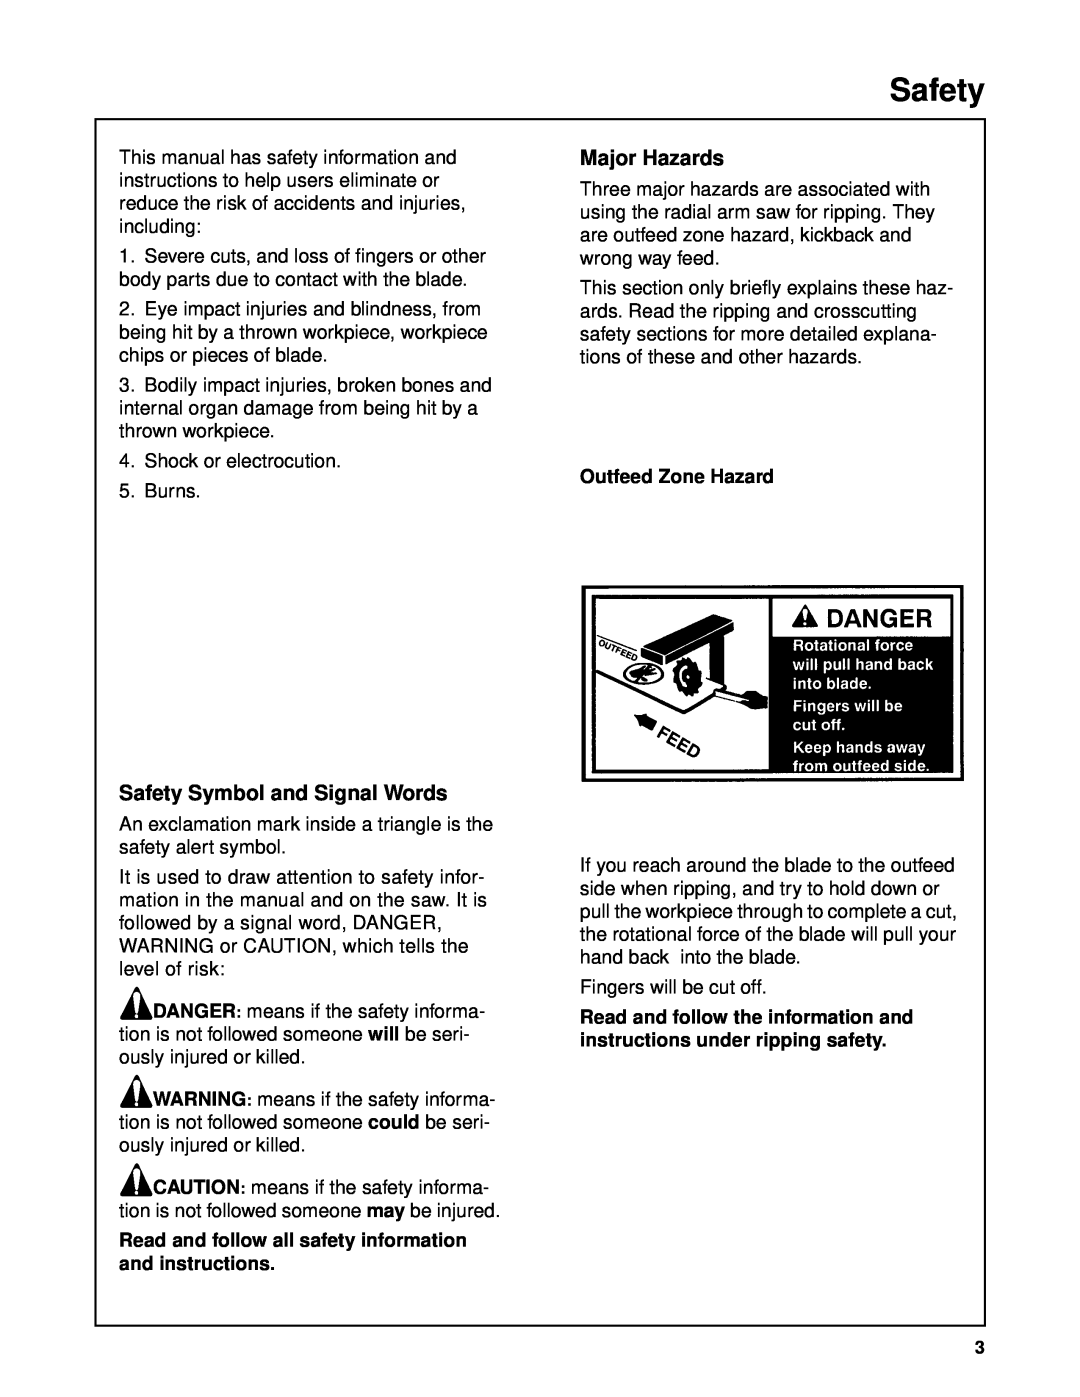 Craftsman 509398, 509399 owner manual Major Hazards, Safety Symbol and Signal Words, Outfeed Zone Hazard 